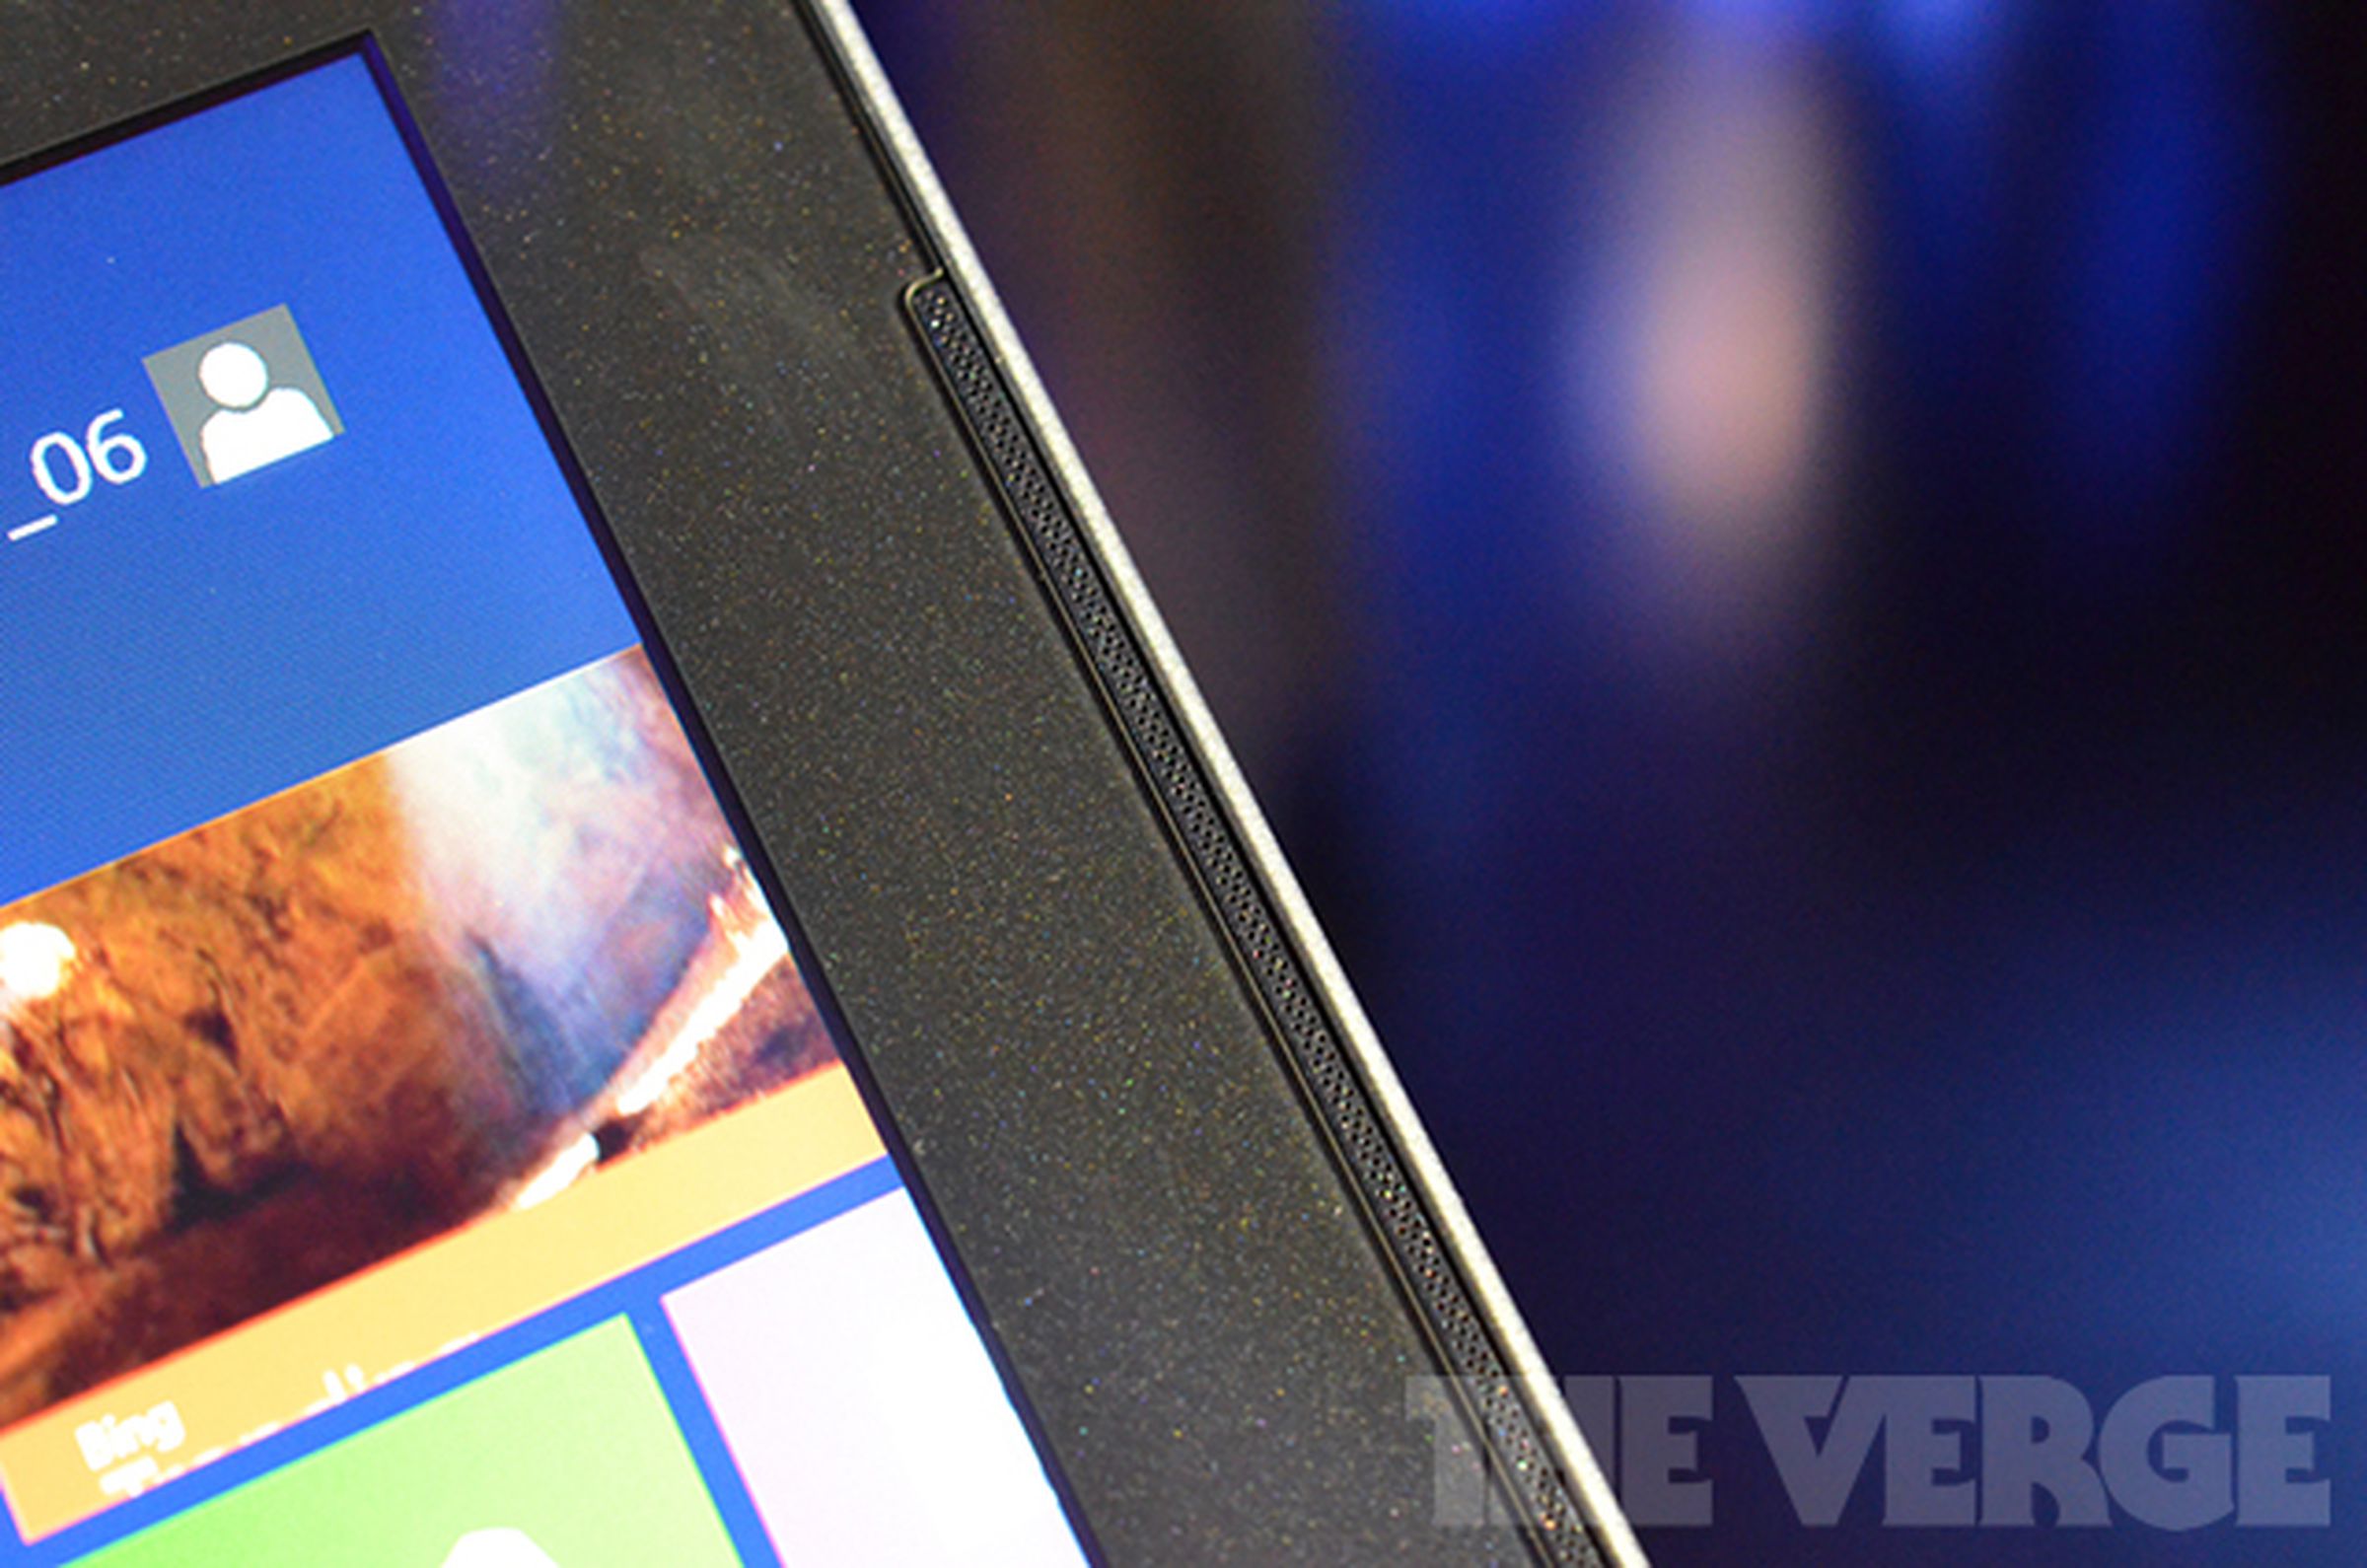 Samsung Ativ Smart PC and Smart PC Pro hands-on pictures